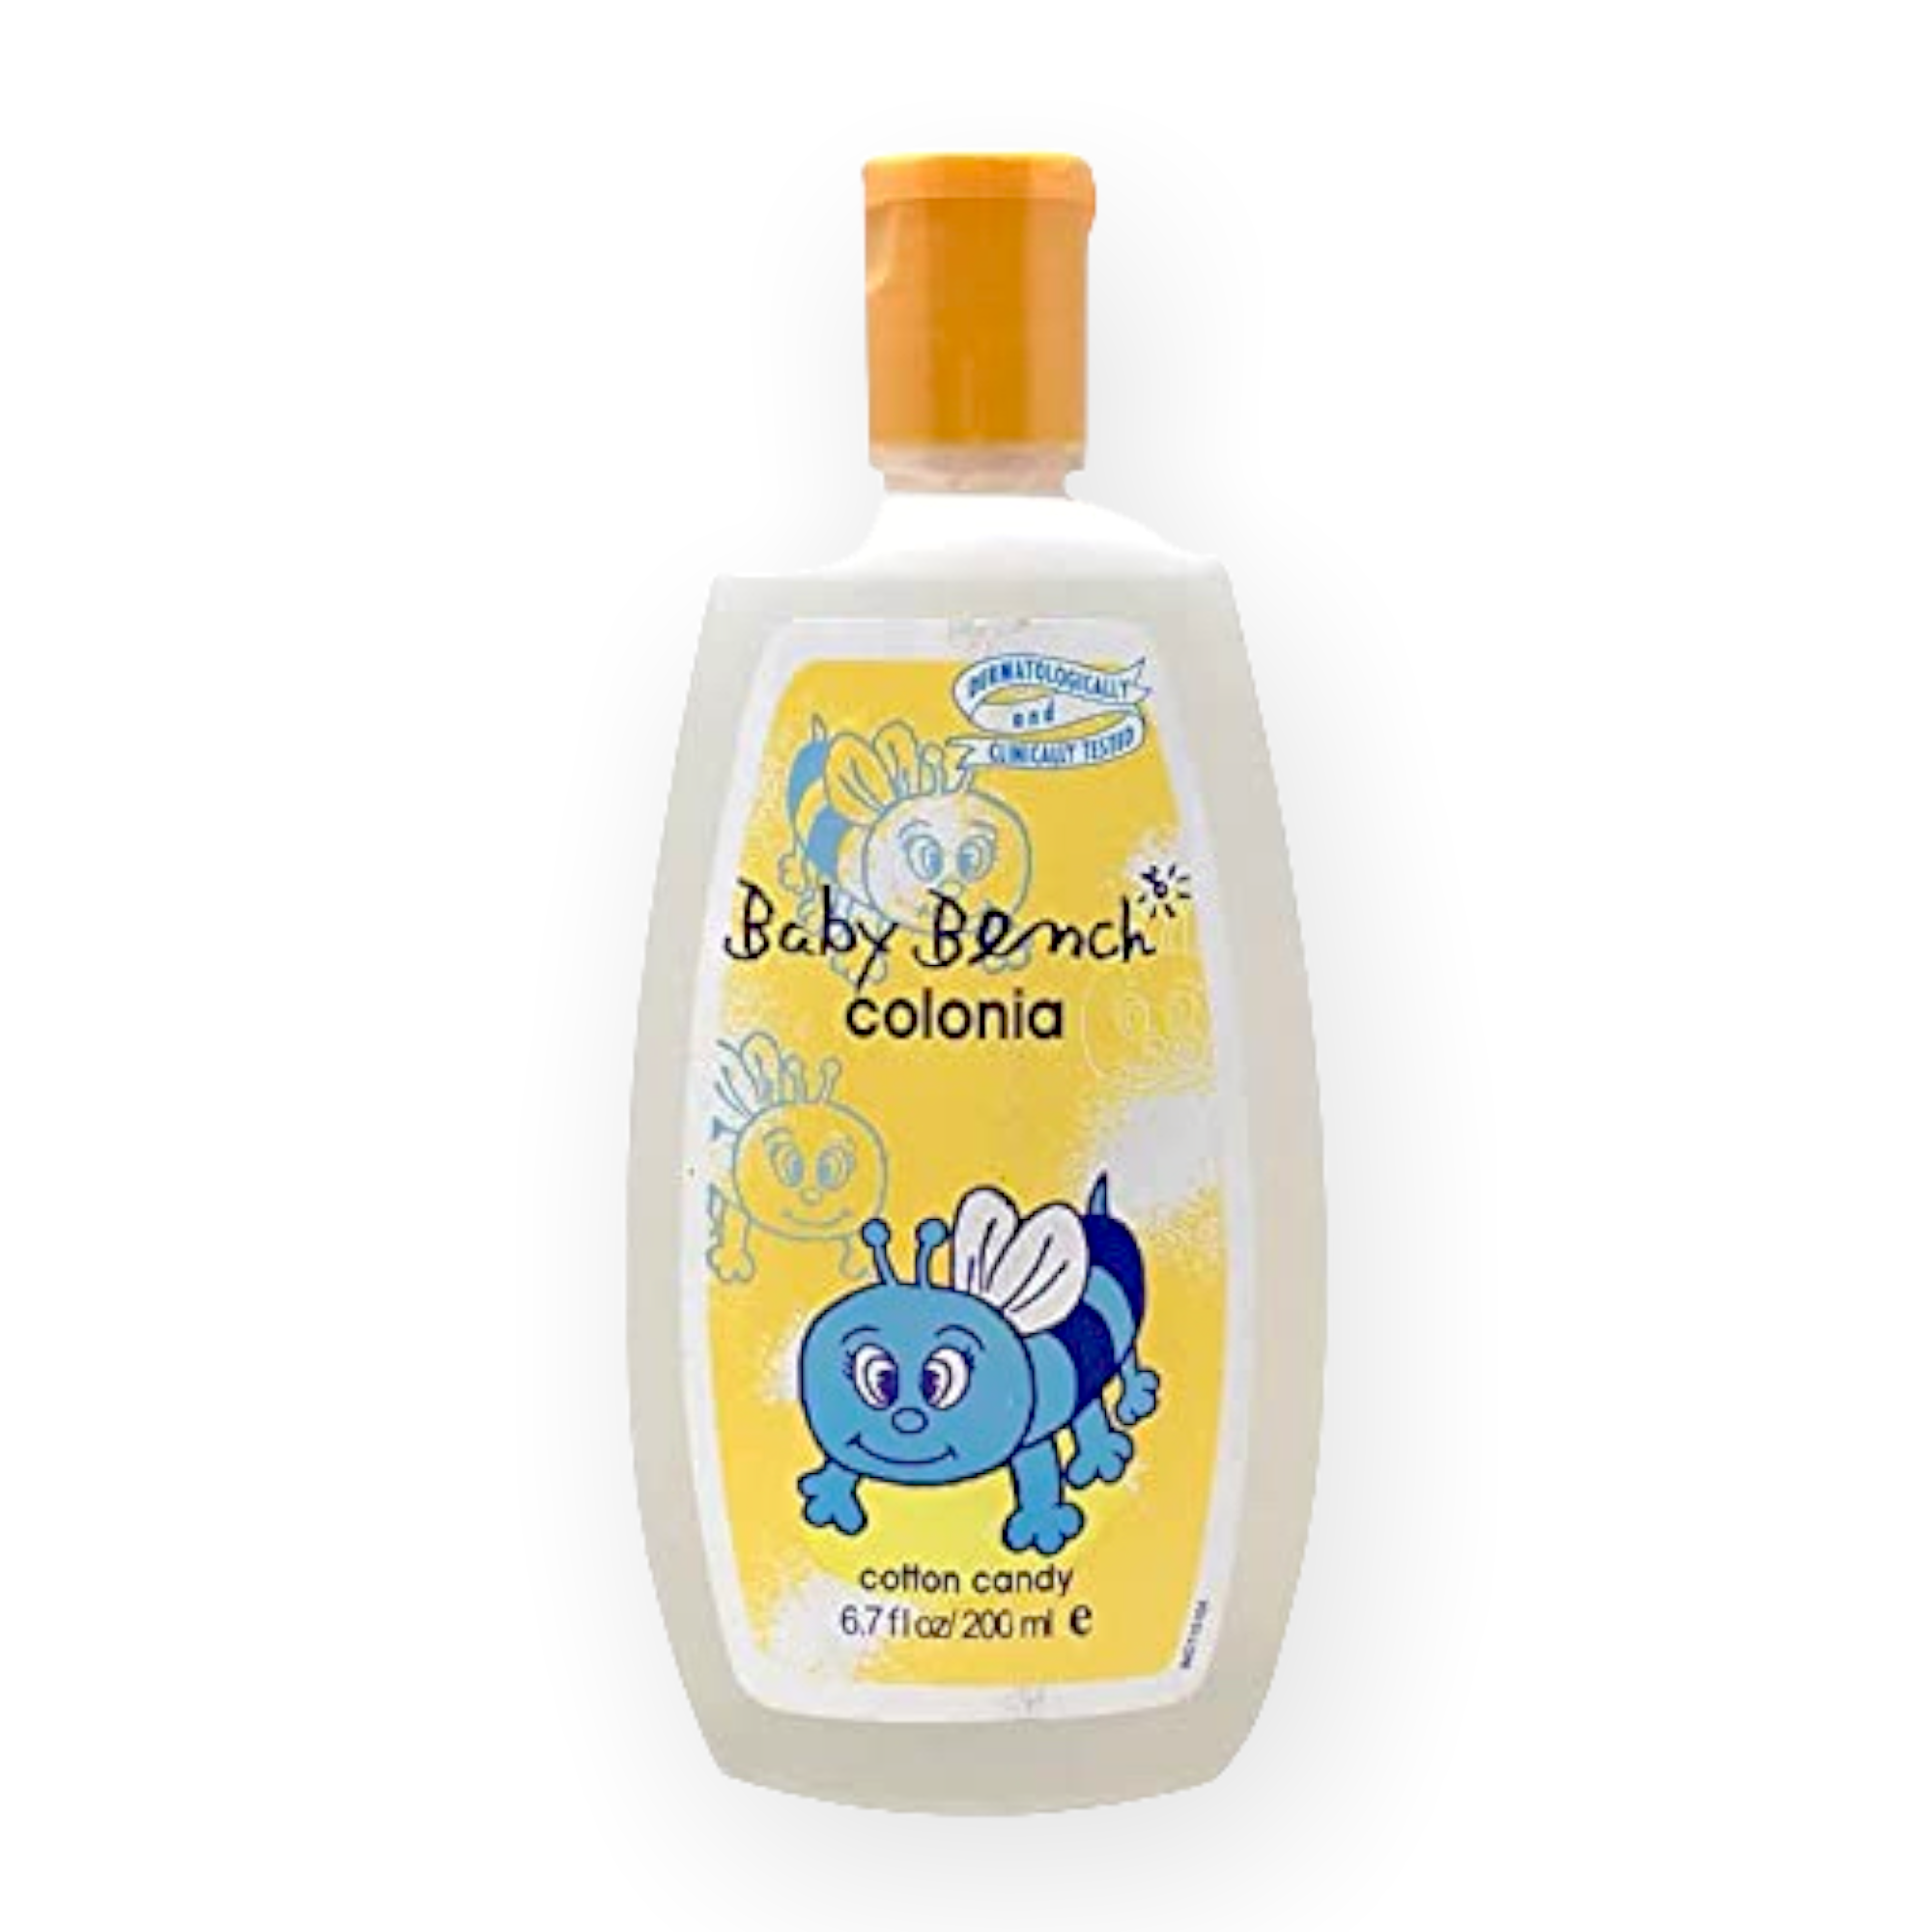 Baby Bench - Colonia - Cotton Candy Cologne -  200 ML